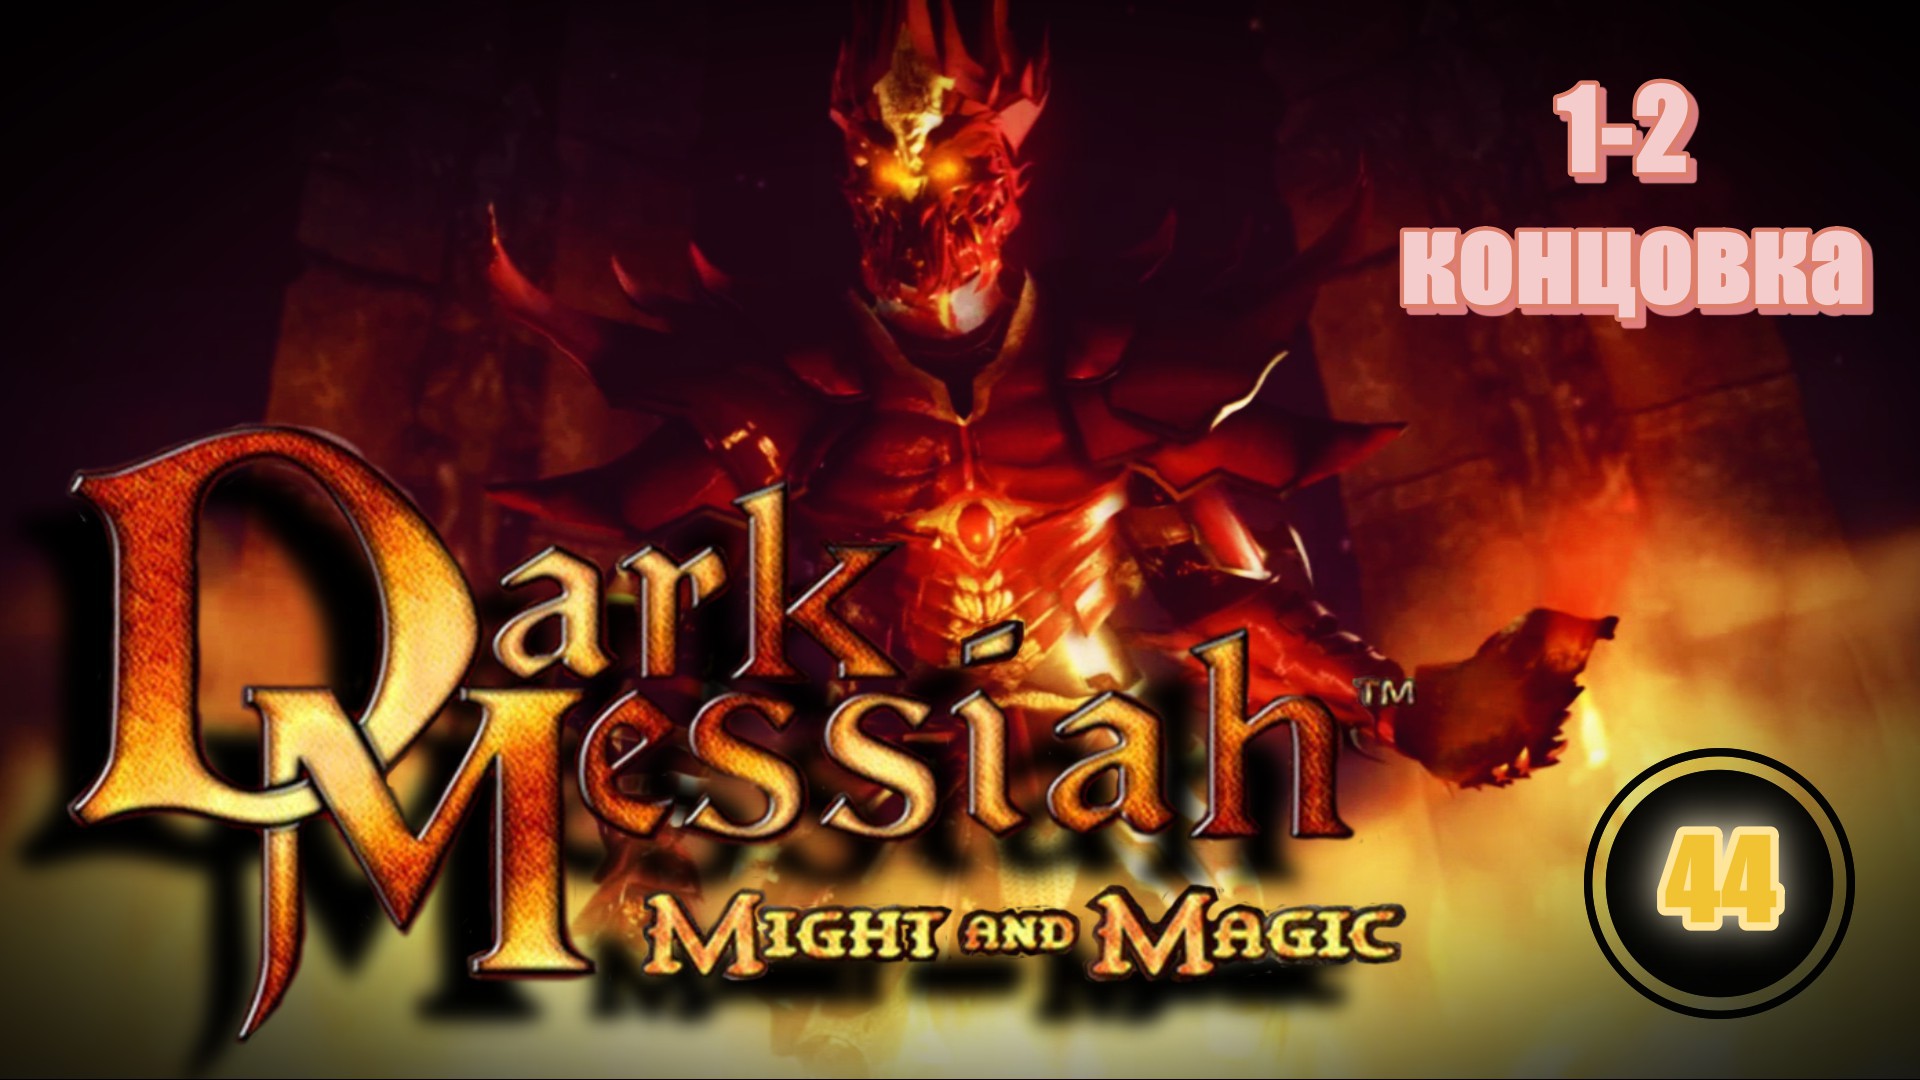 Dark Messiah of Might and Magic 44 (1-2 концовка)